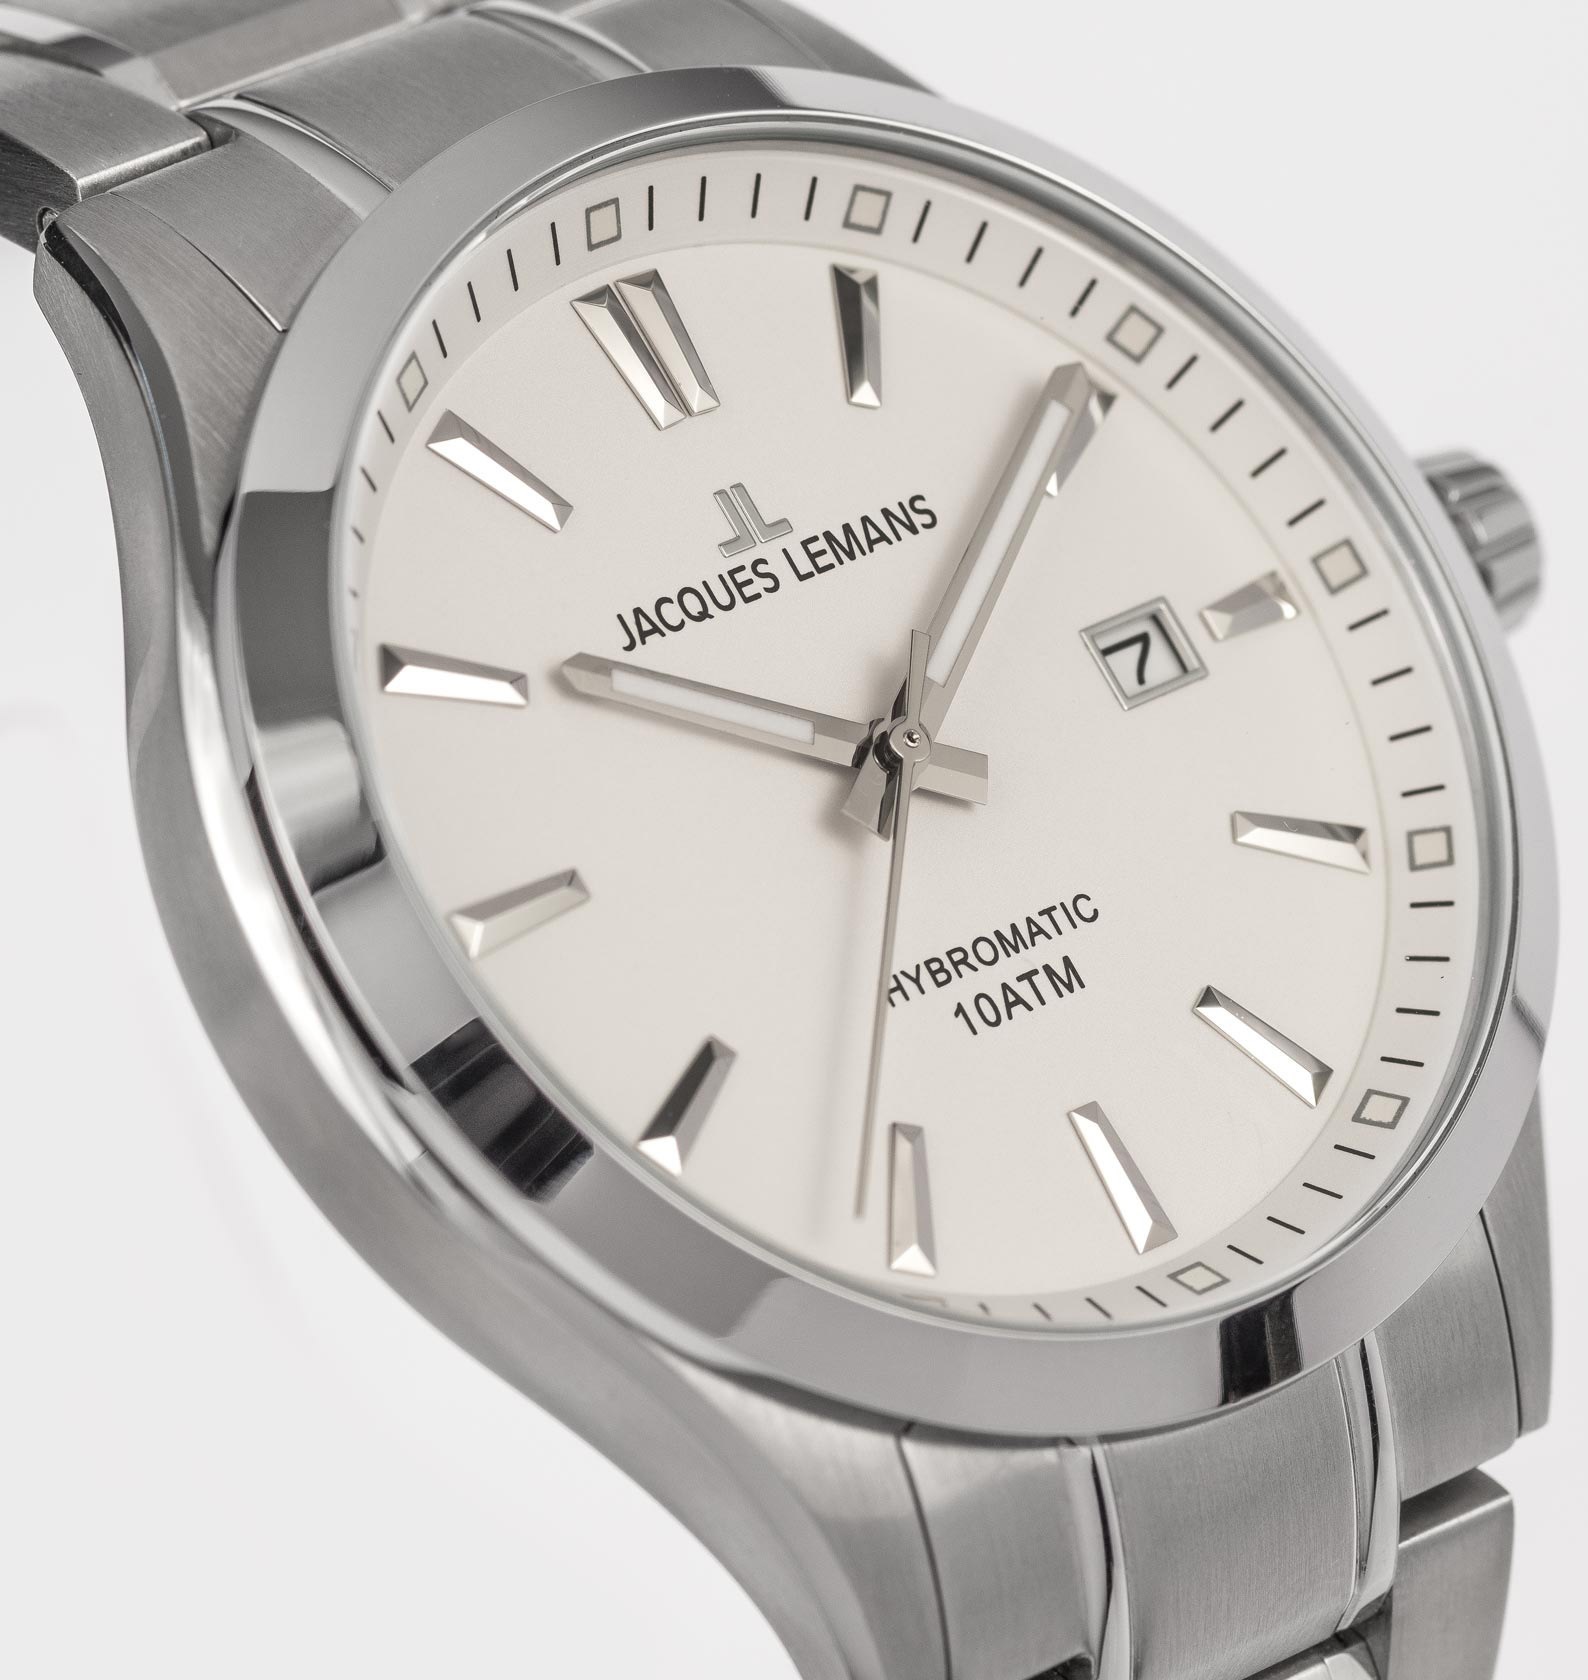 ♕ »Hybromatic, Jacques bei 1-2130F« Kineticuhr Lemans